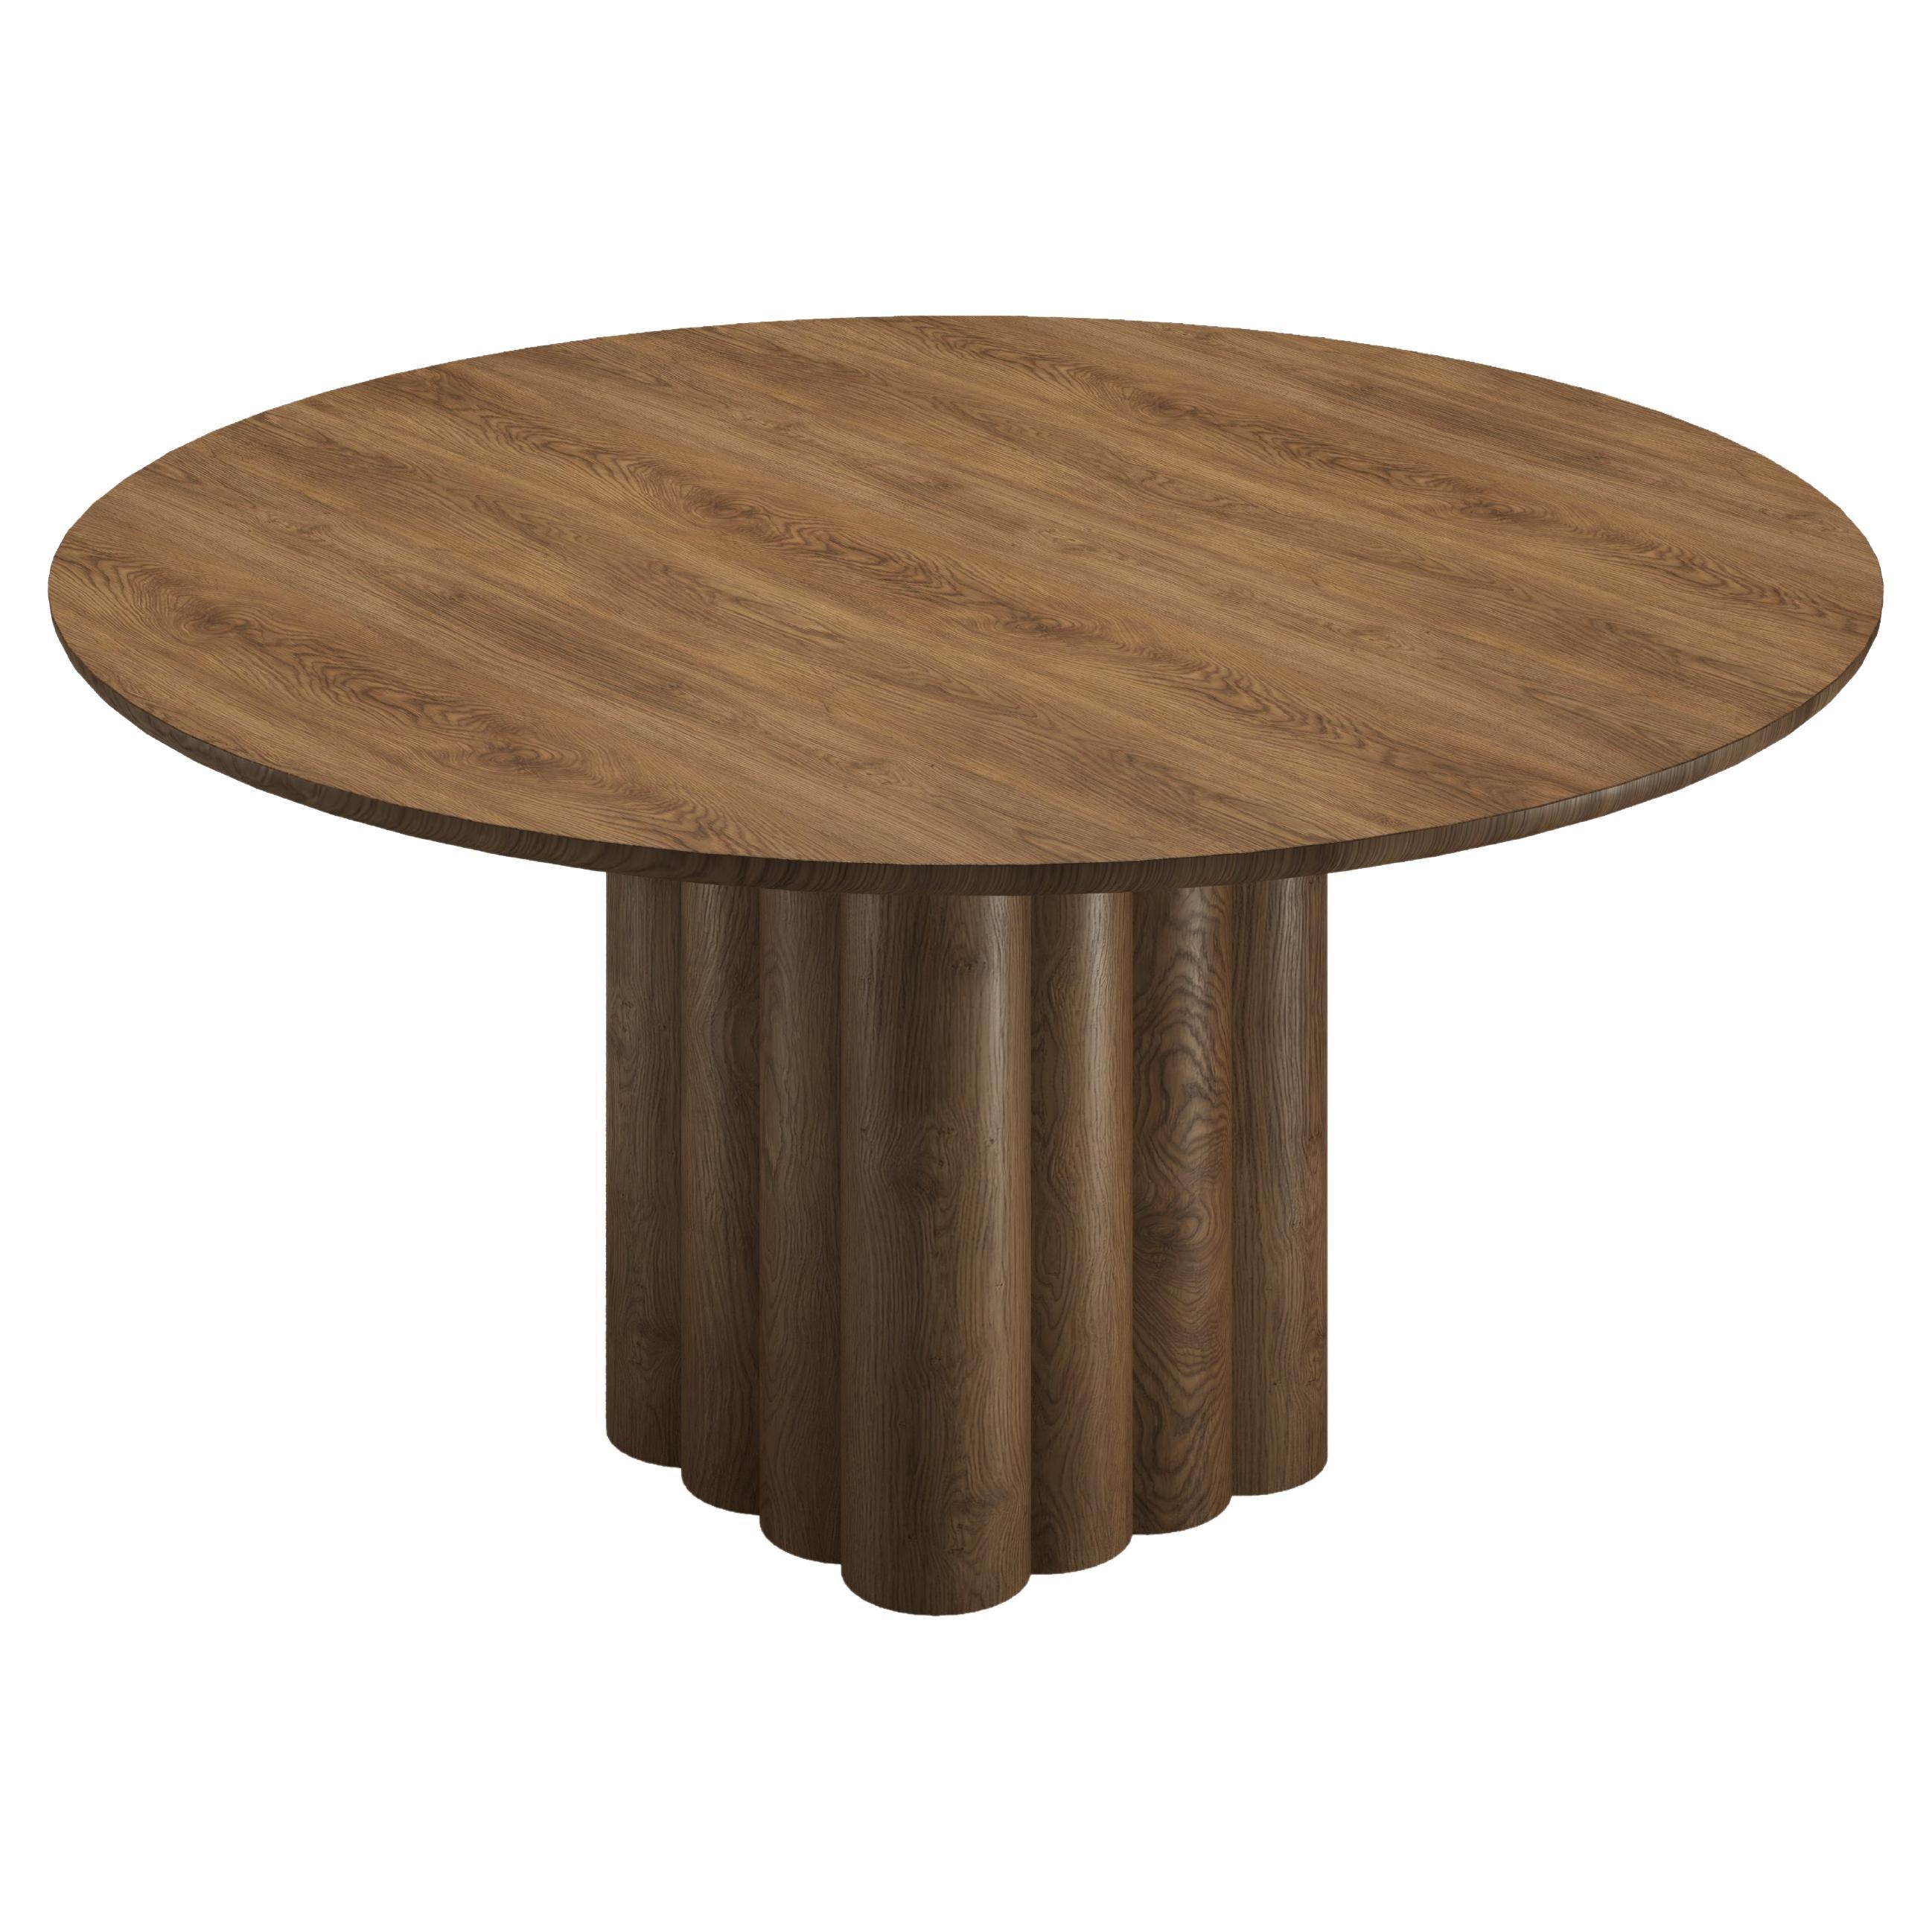 Round Dining Table 'Plush' by Dk3, Smoked Oak or Walnut, 150 cm For Sale